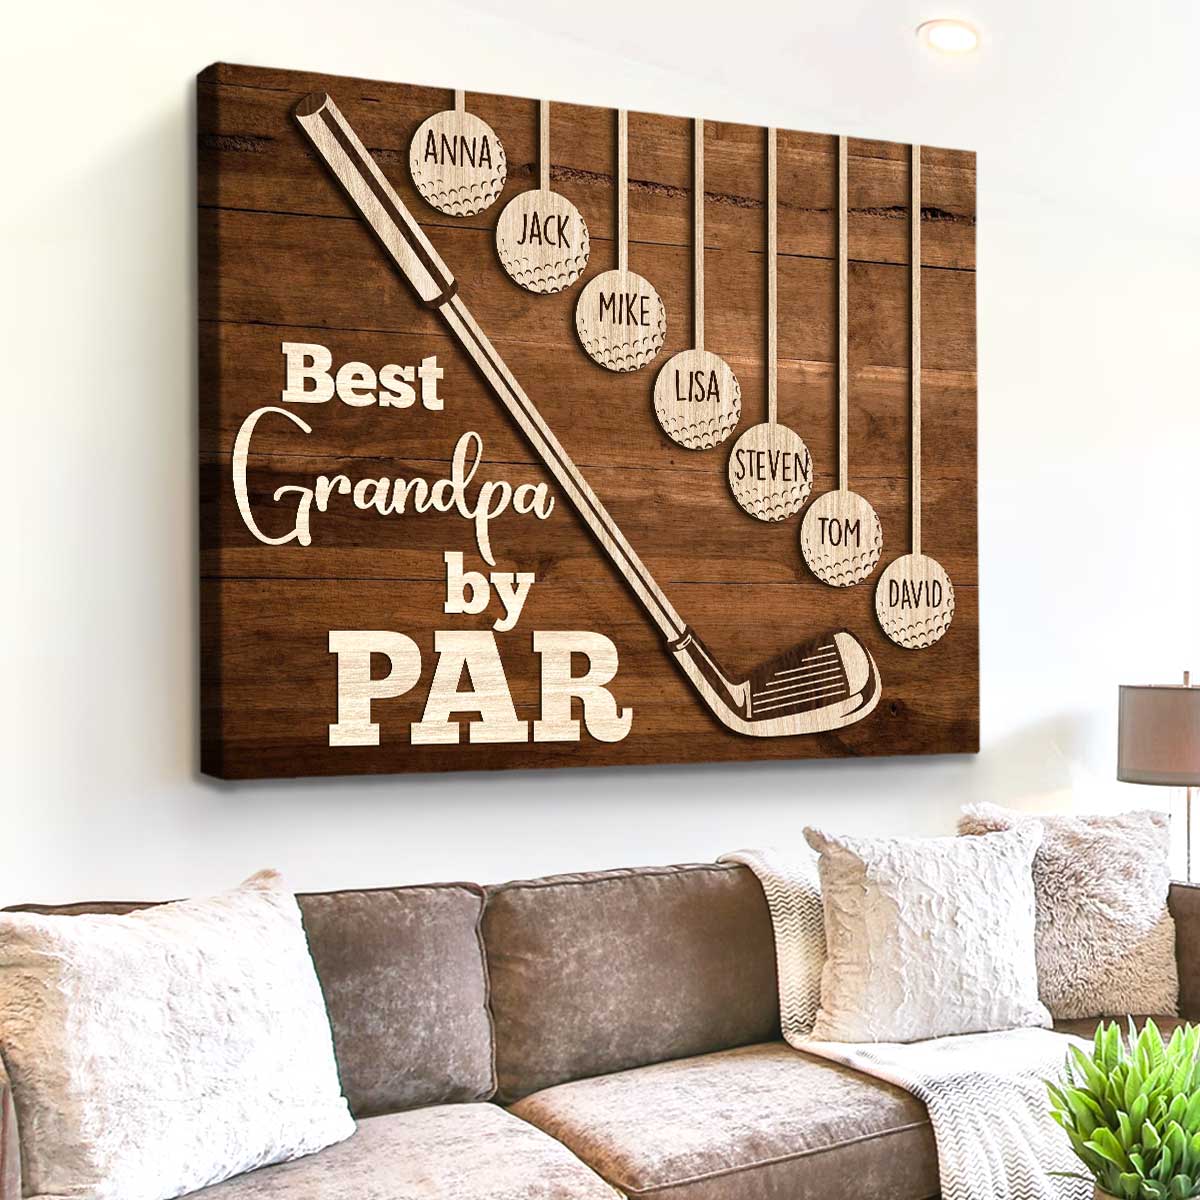 Buy Best G-pa by Par Shirt, Golf G-pa Tshirt, Golfer Gpa Gift From  Grandkids for Fathers Day, Birthday, Golfing G Pa Themed Grandpa Tee, Par  Tee Online in India 